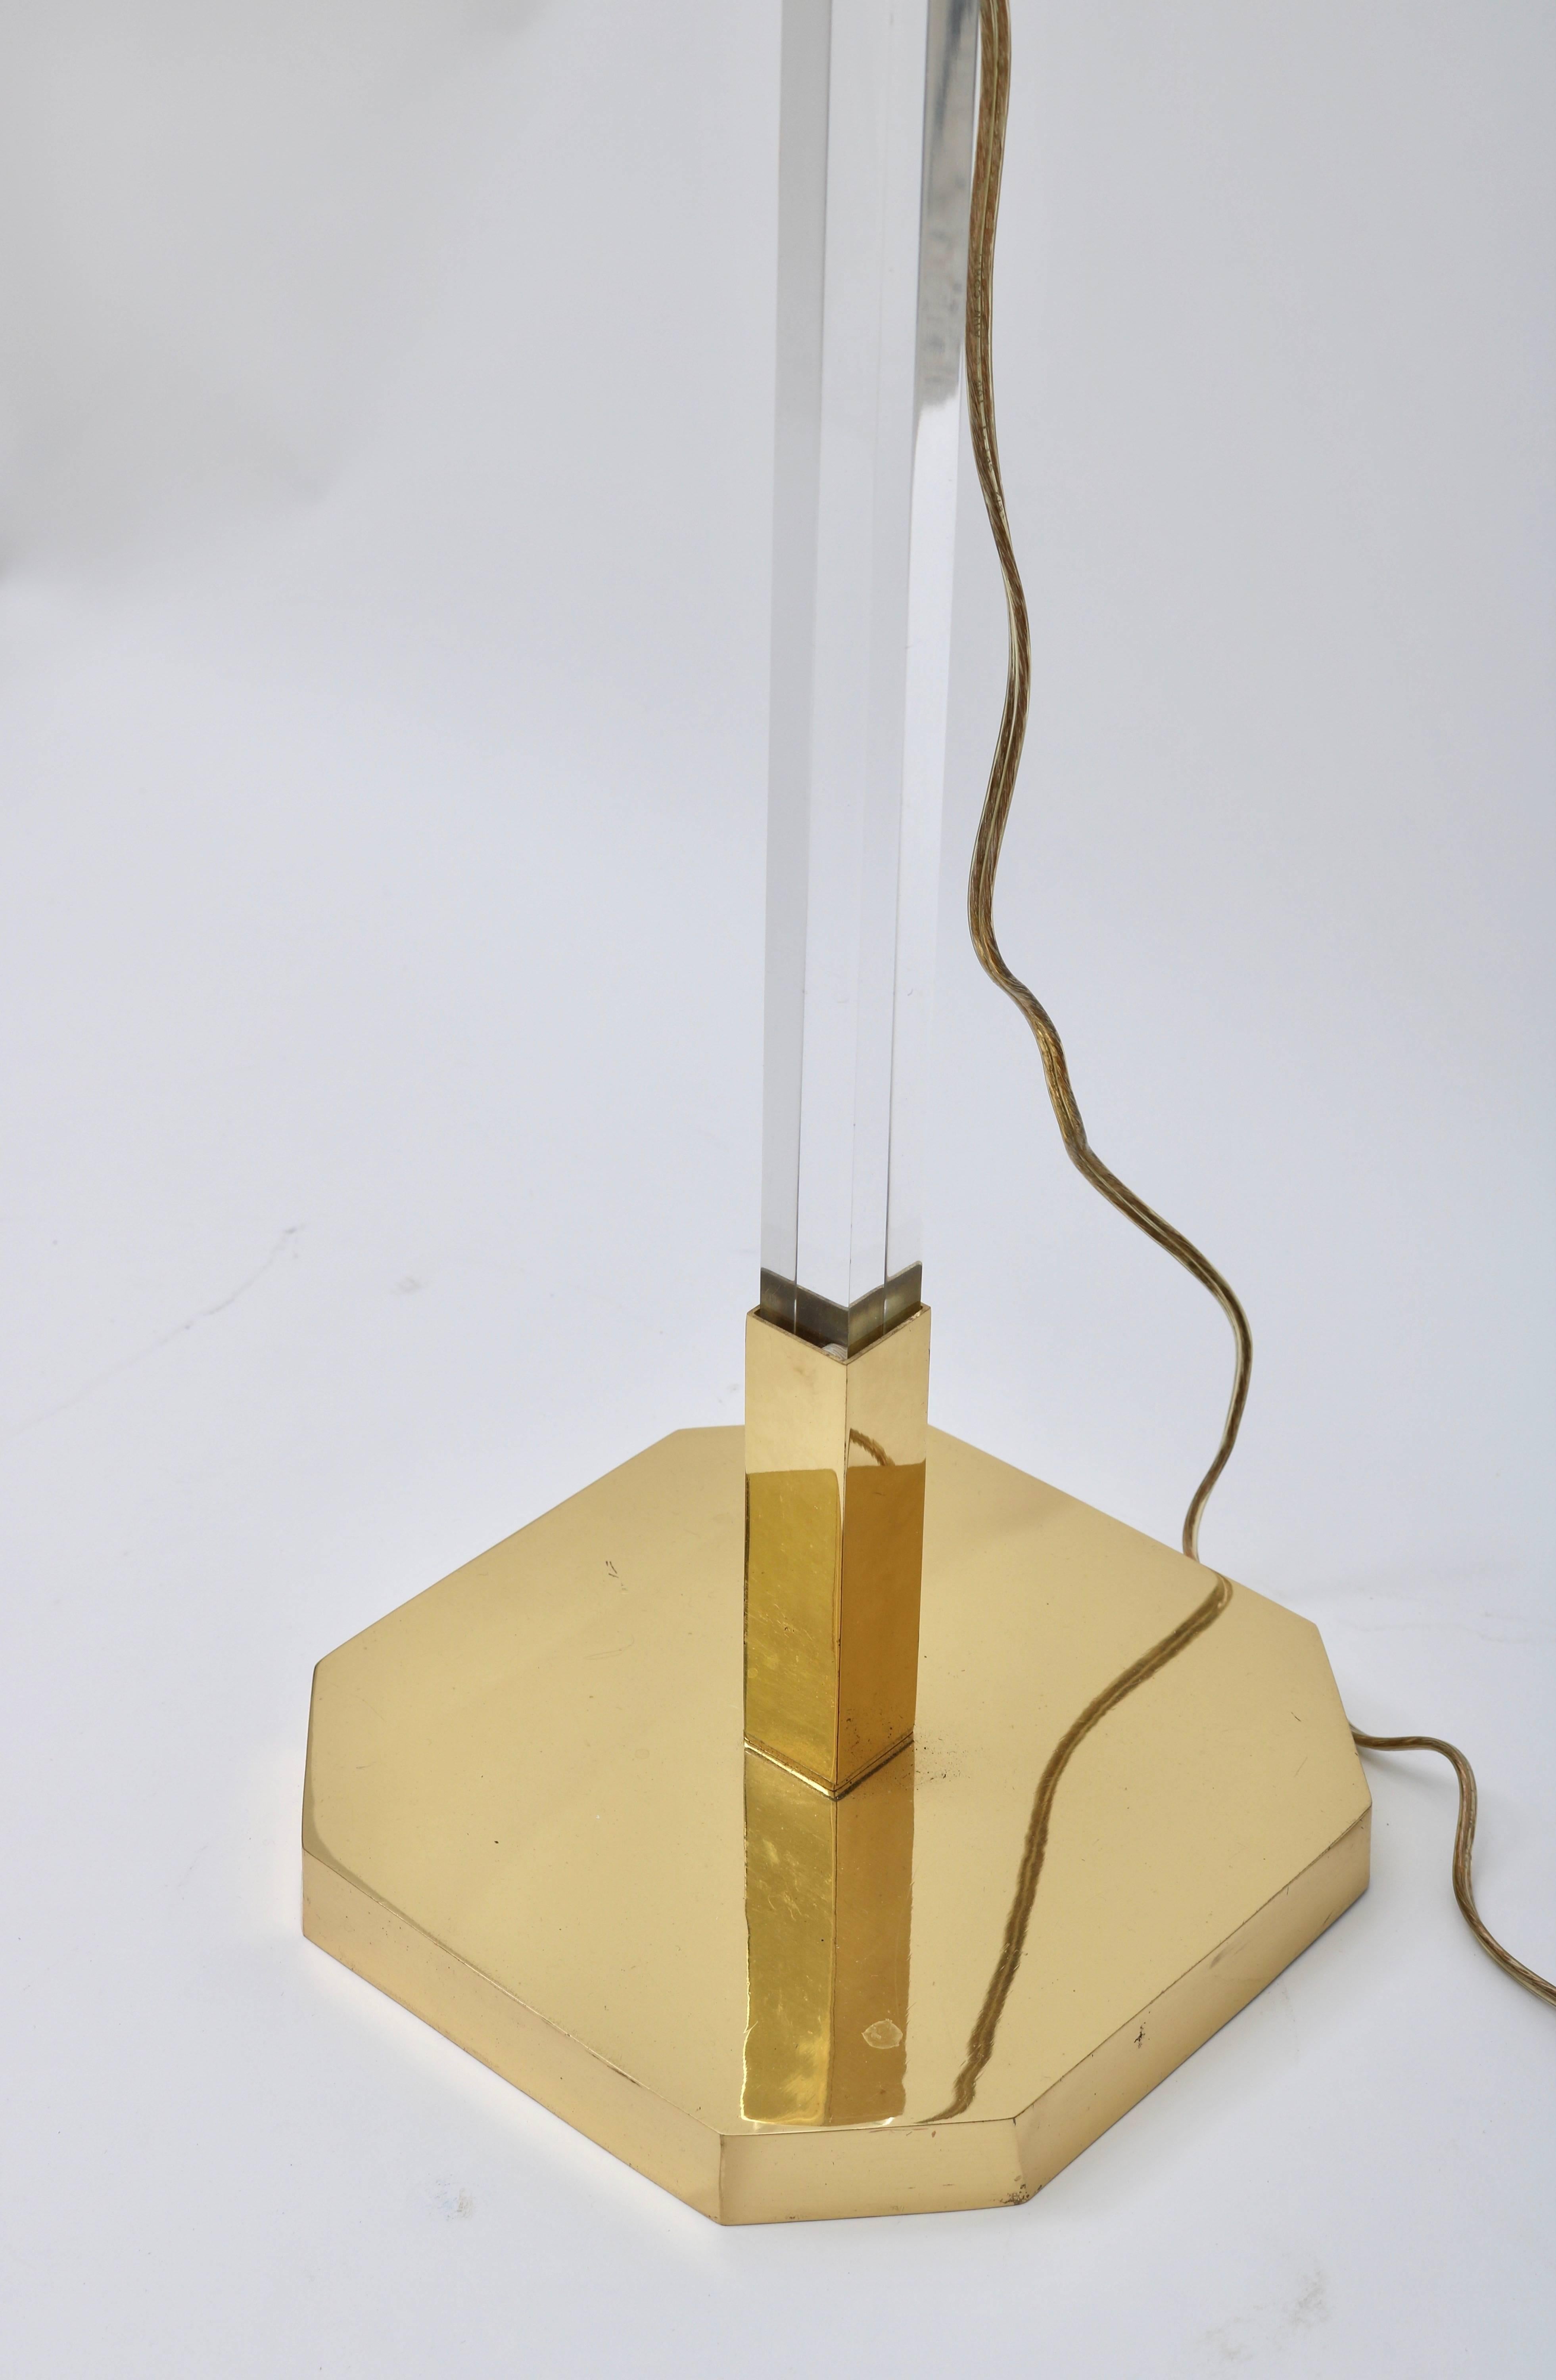  Adjustable Floor Lamp in Polished Brass and Lucite 3